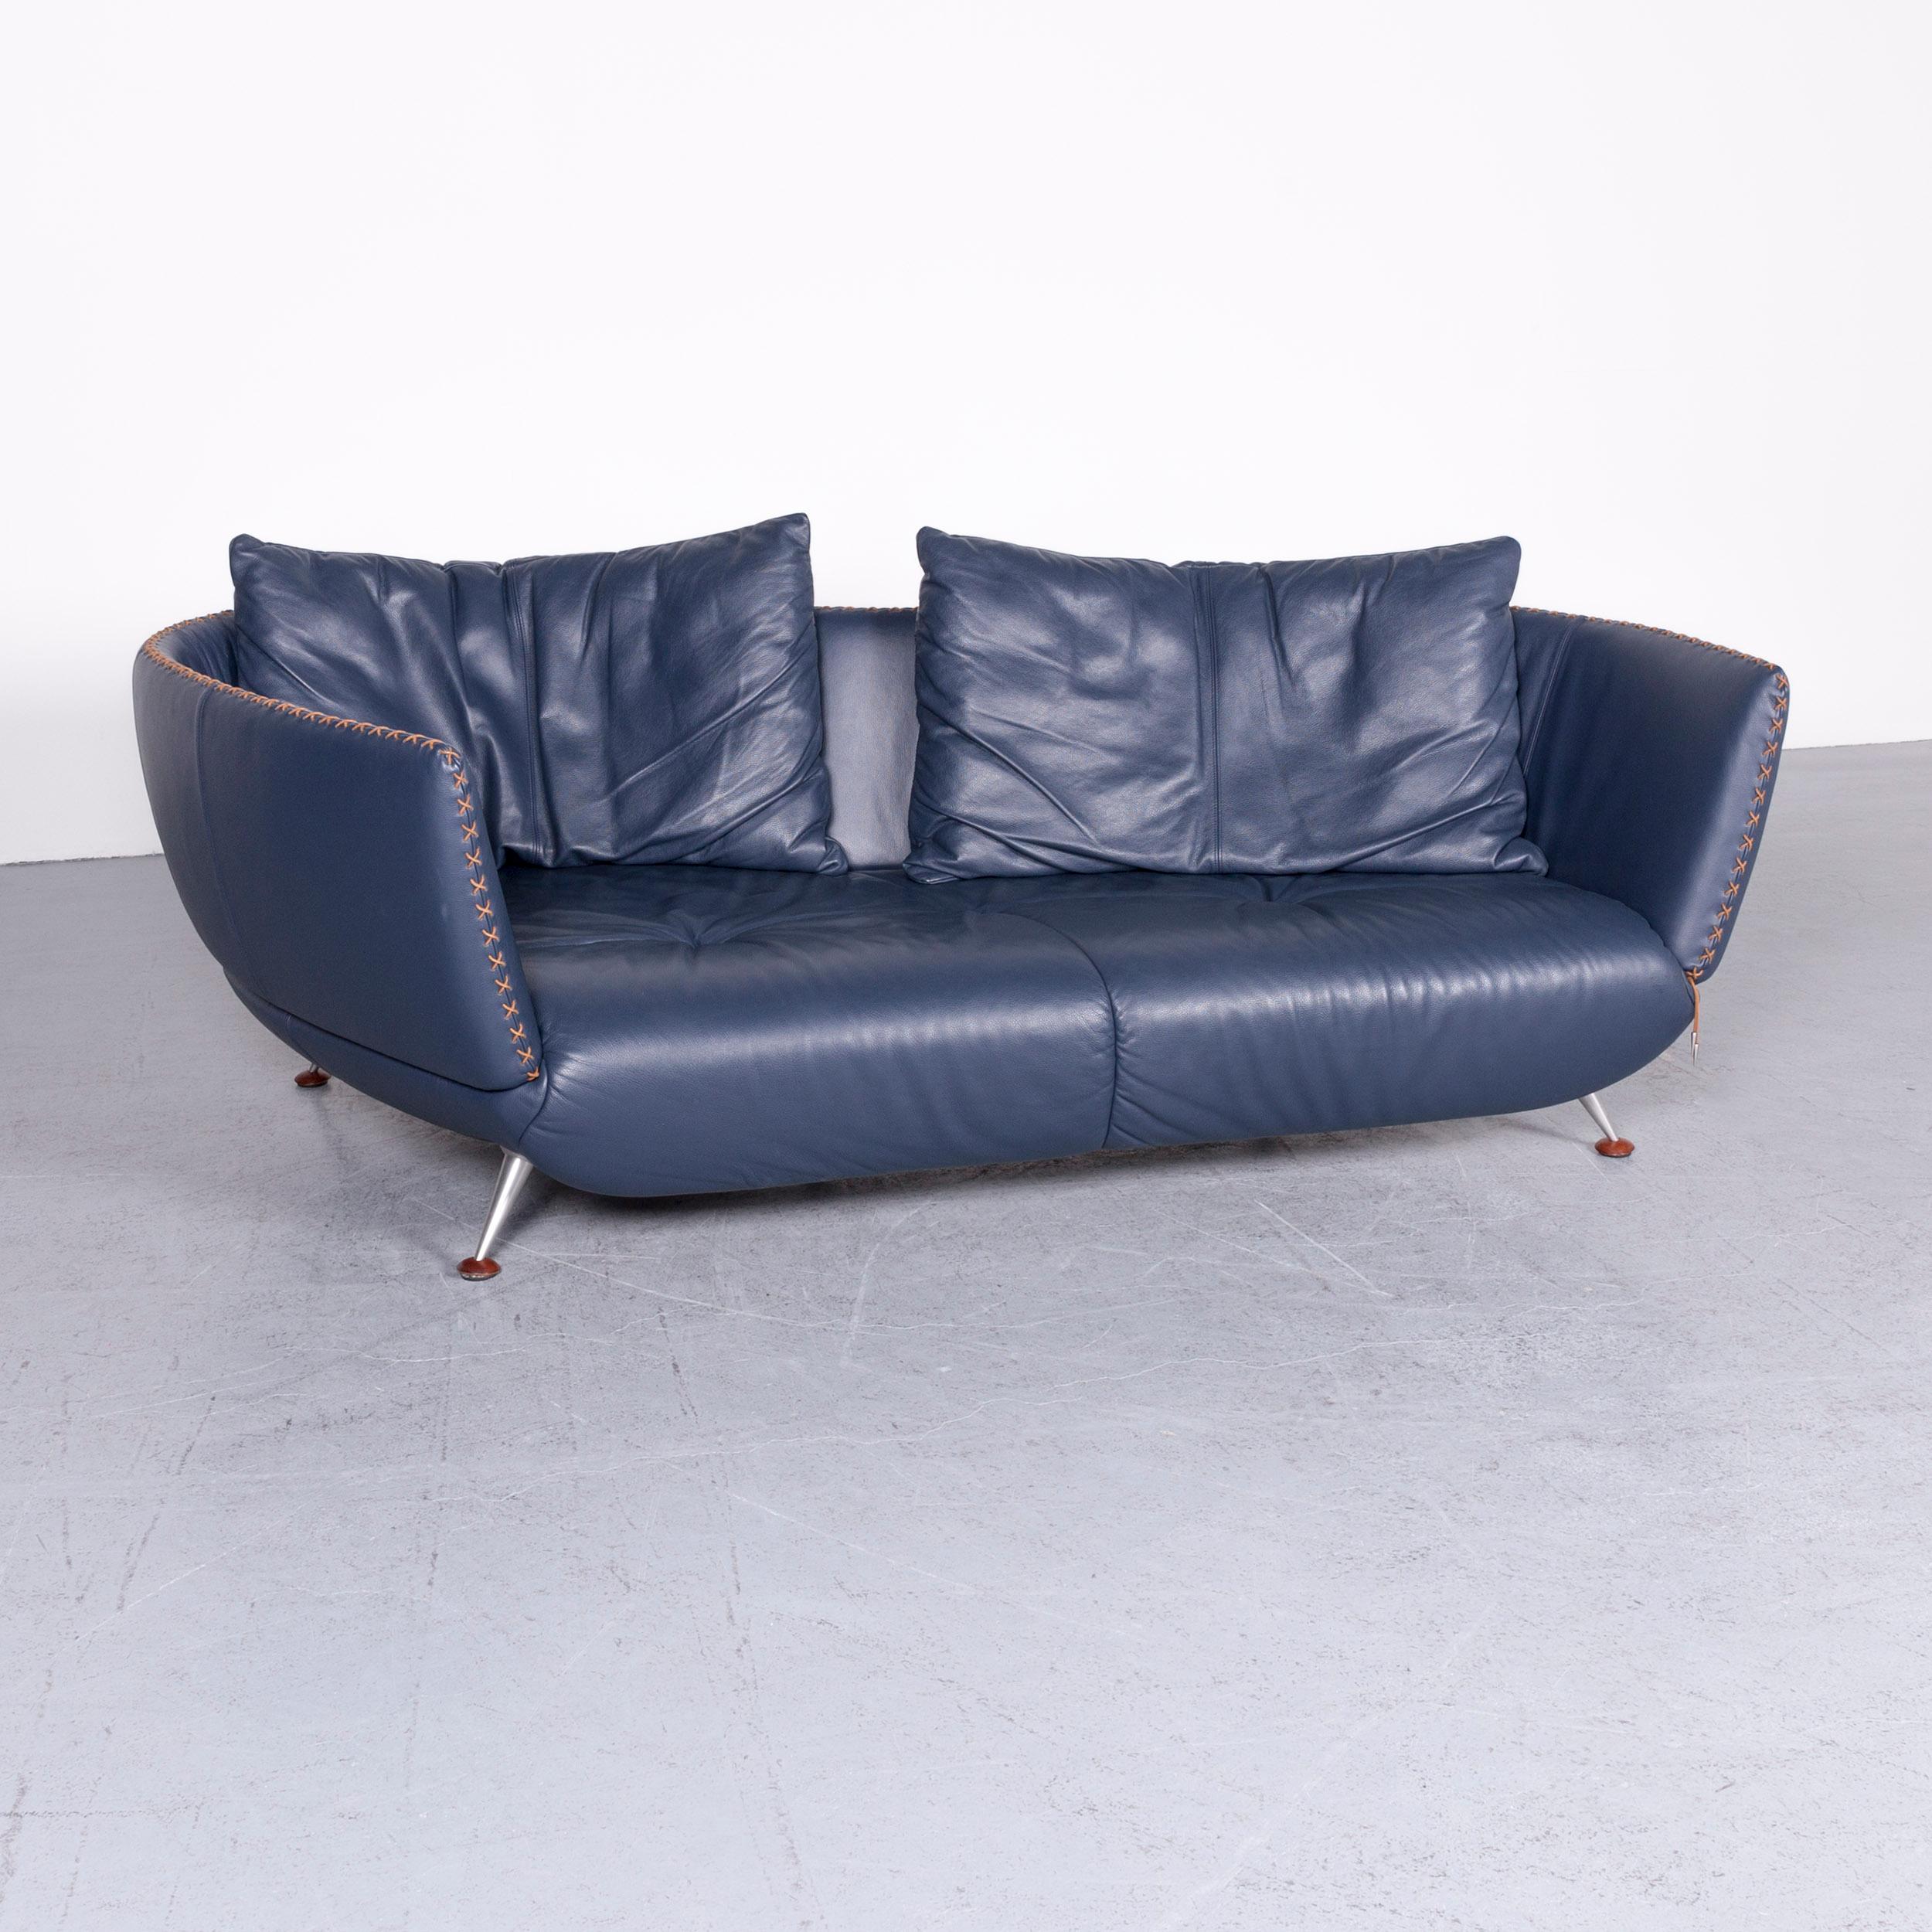 We bring to you a De Sede Ds 102 designer leather sofa blue blue-seat couch.









